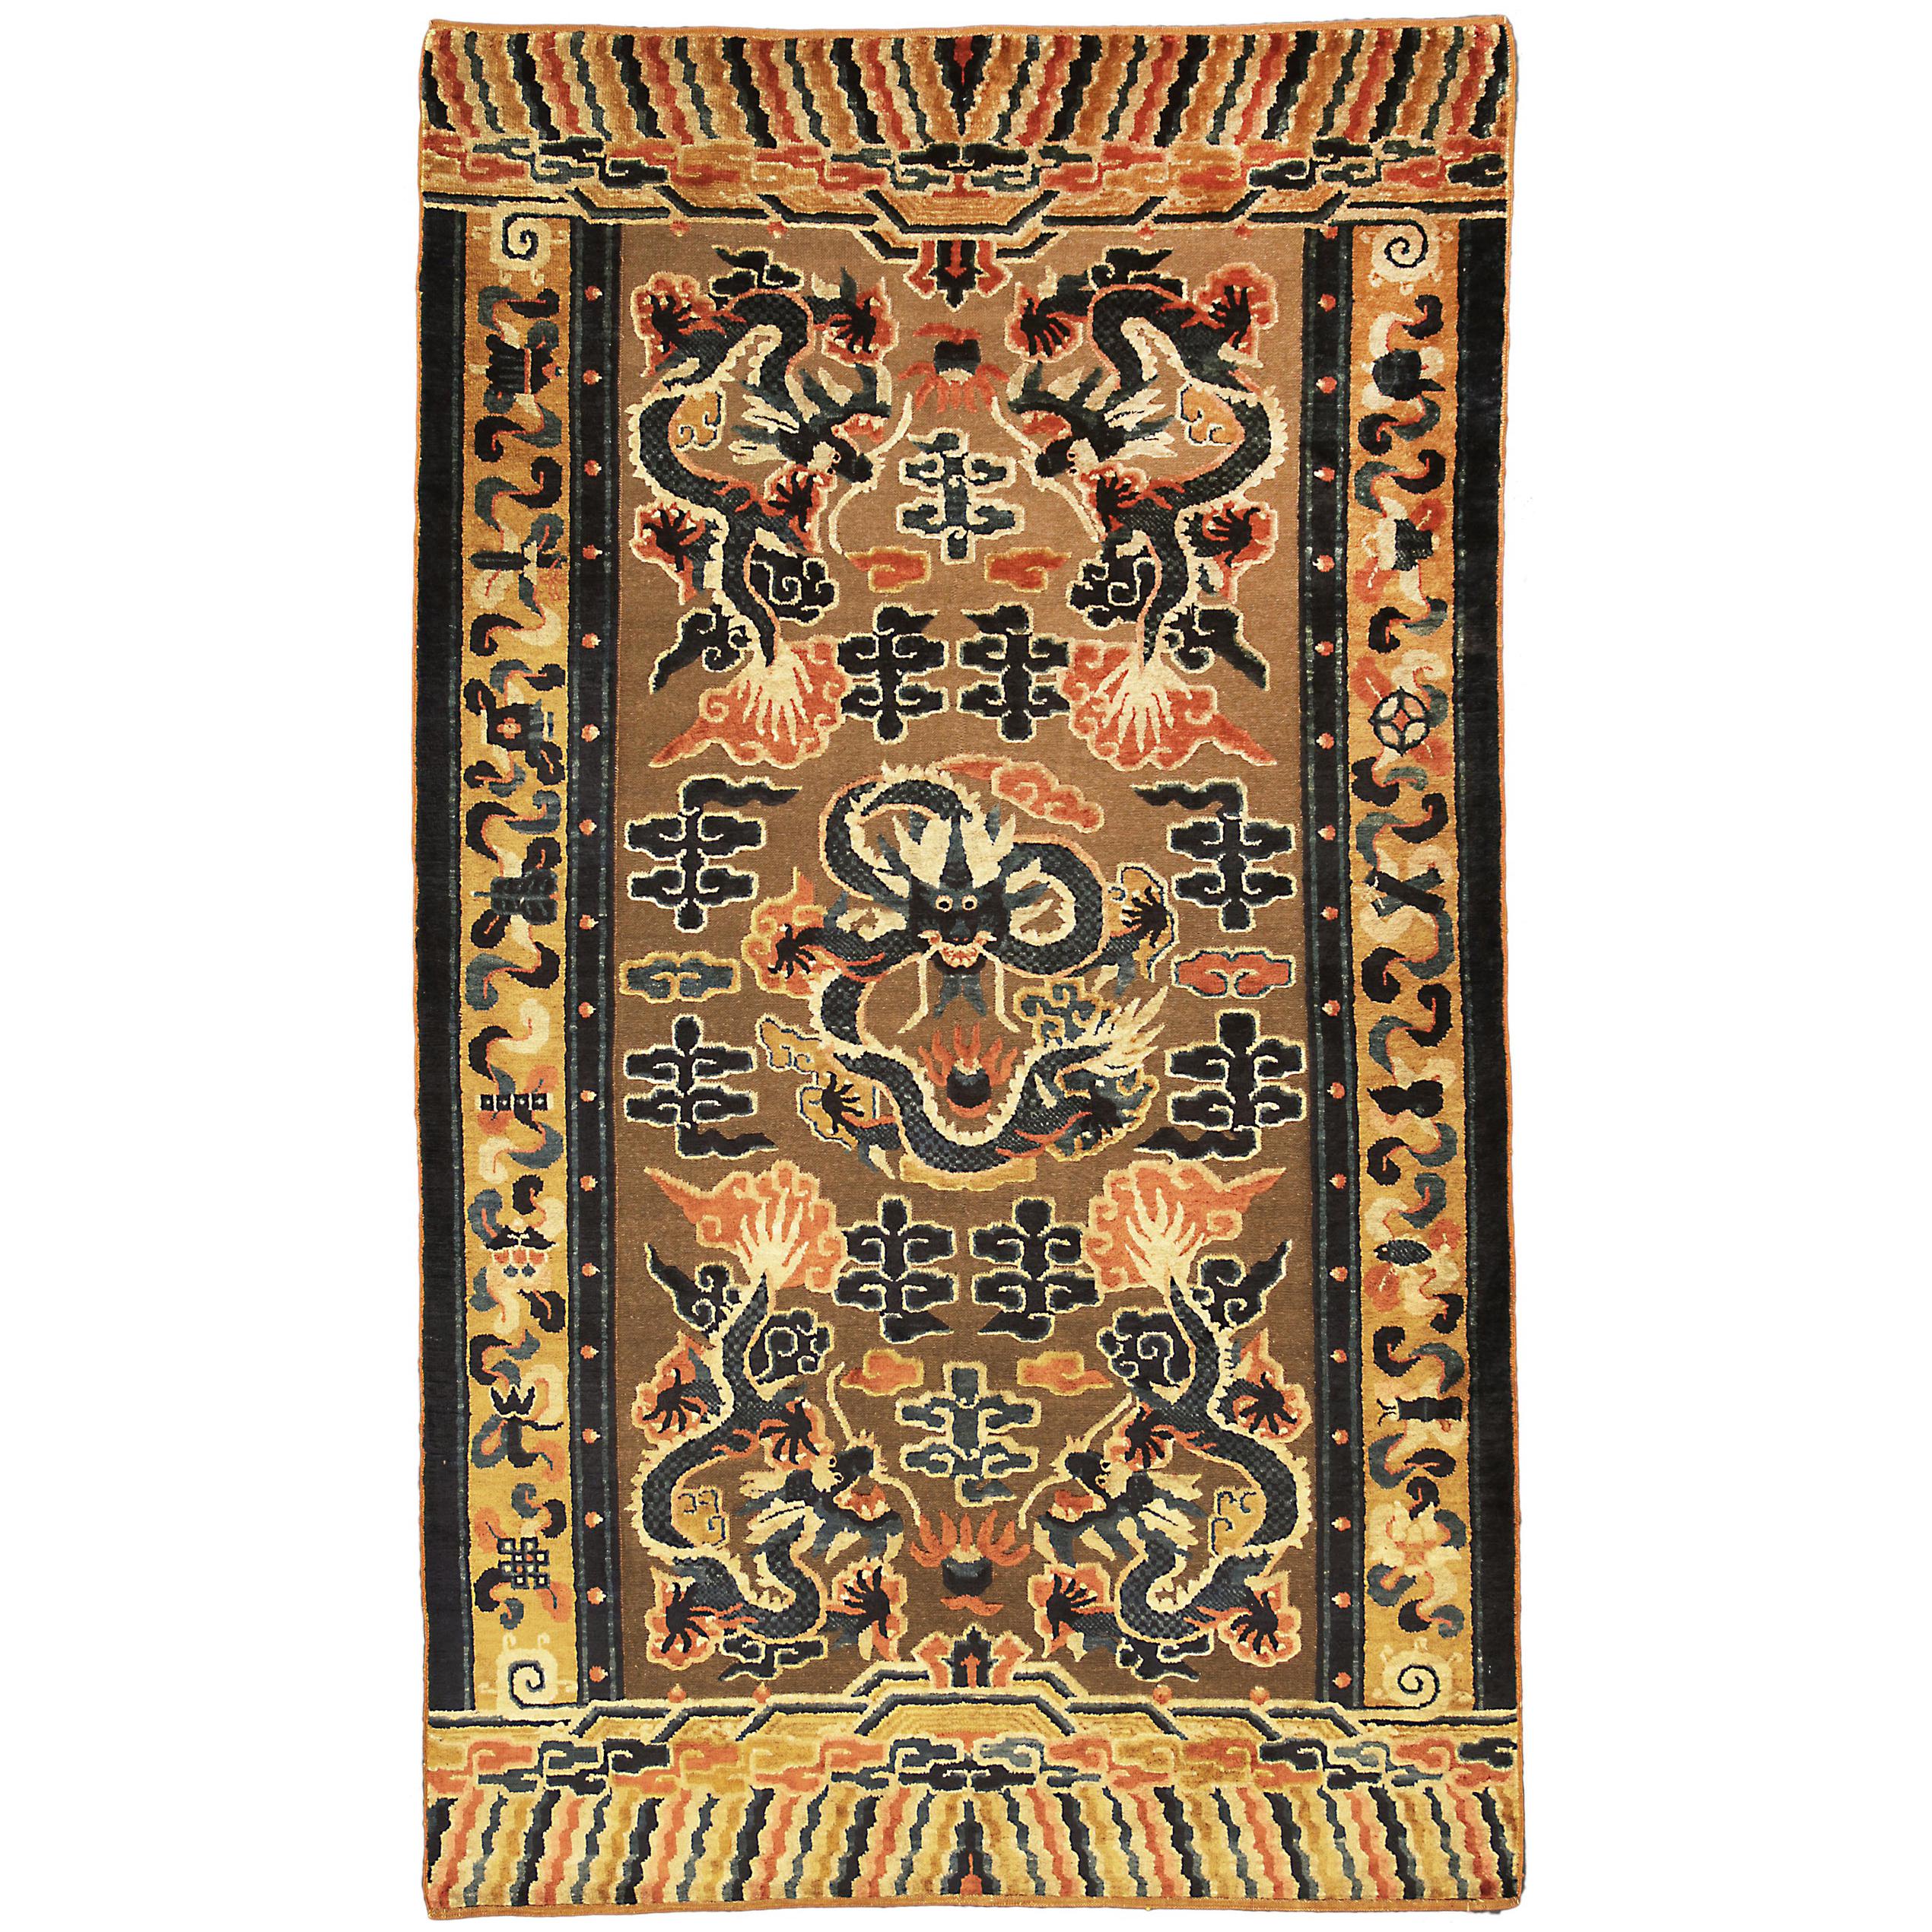 19th Century Ningxia Brown Metal-Thread Imperial Palace Souf Chinese Rug